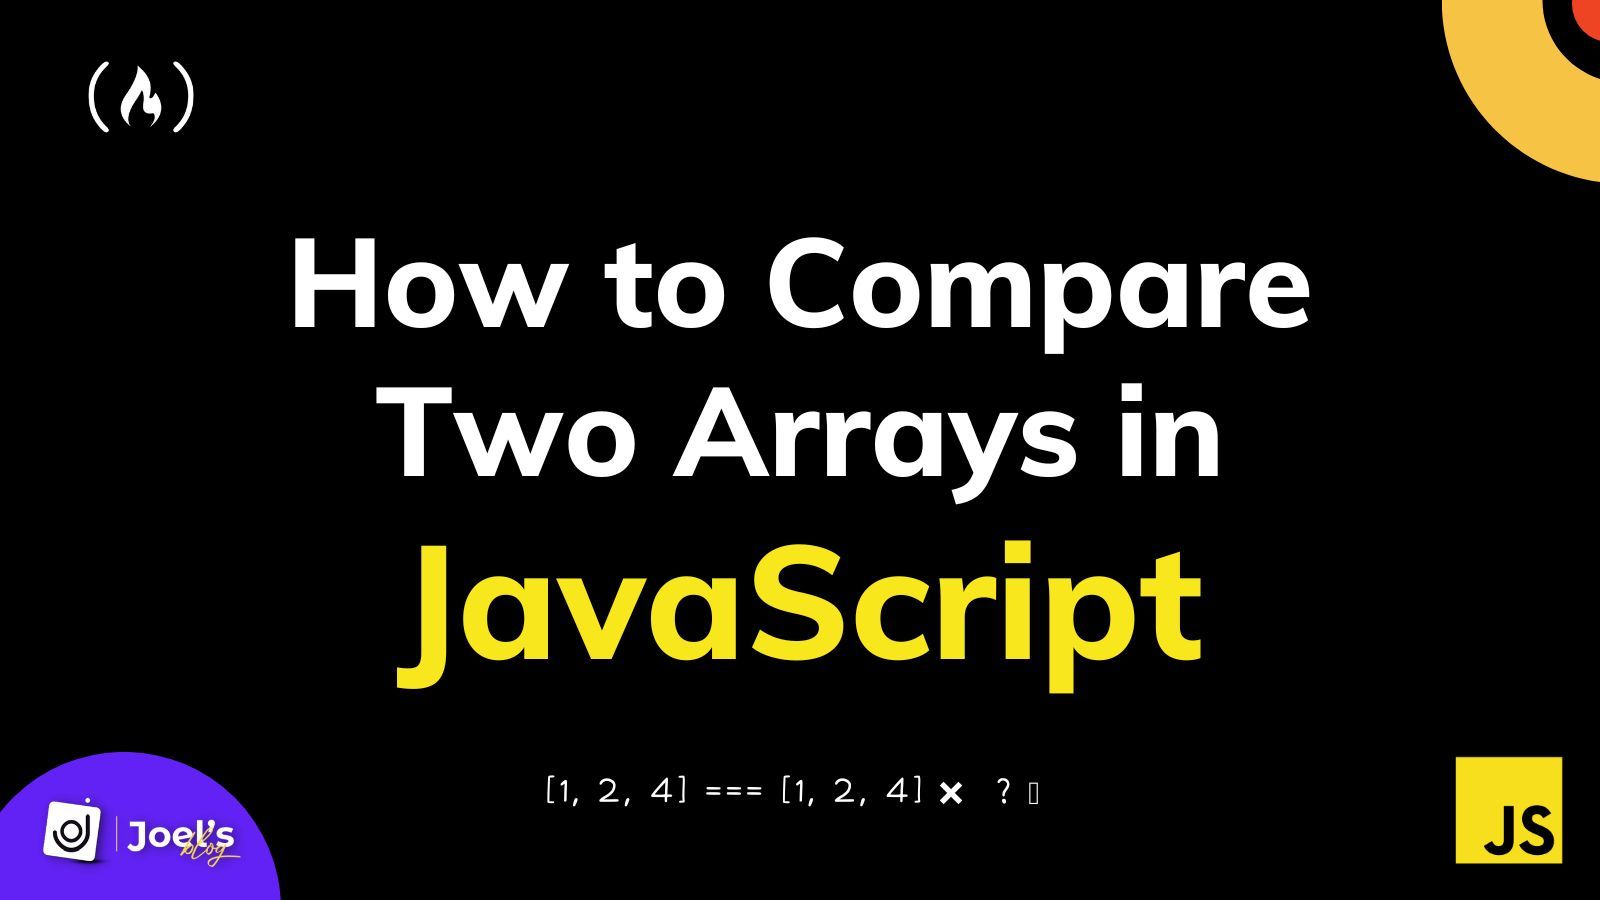 Comparing Arrays in JavaScript – How to Compare 2 Arrays in JS